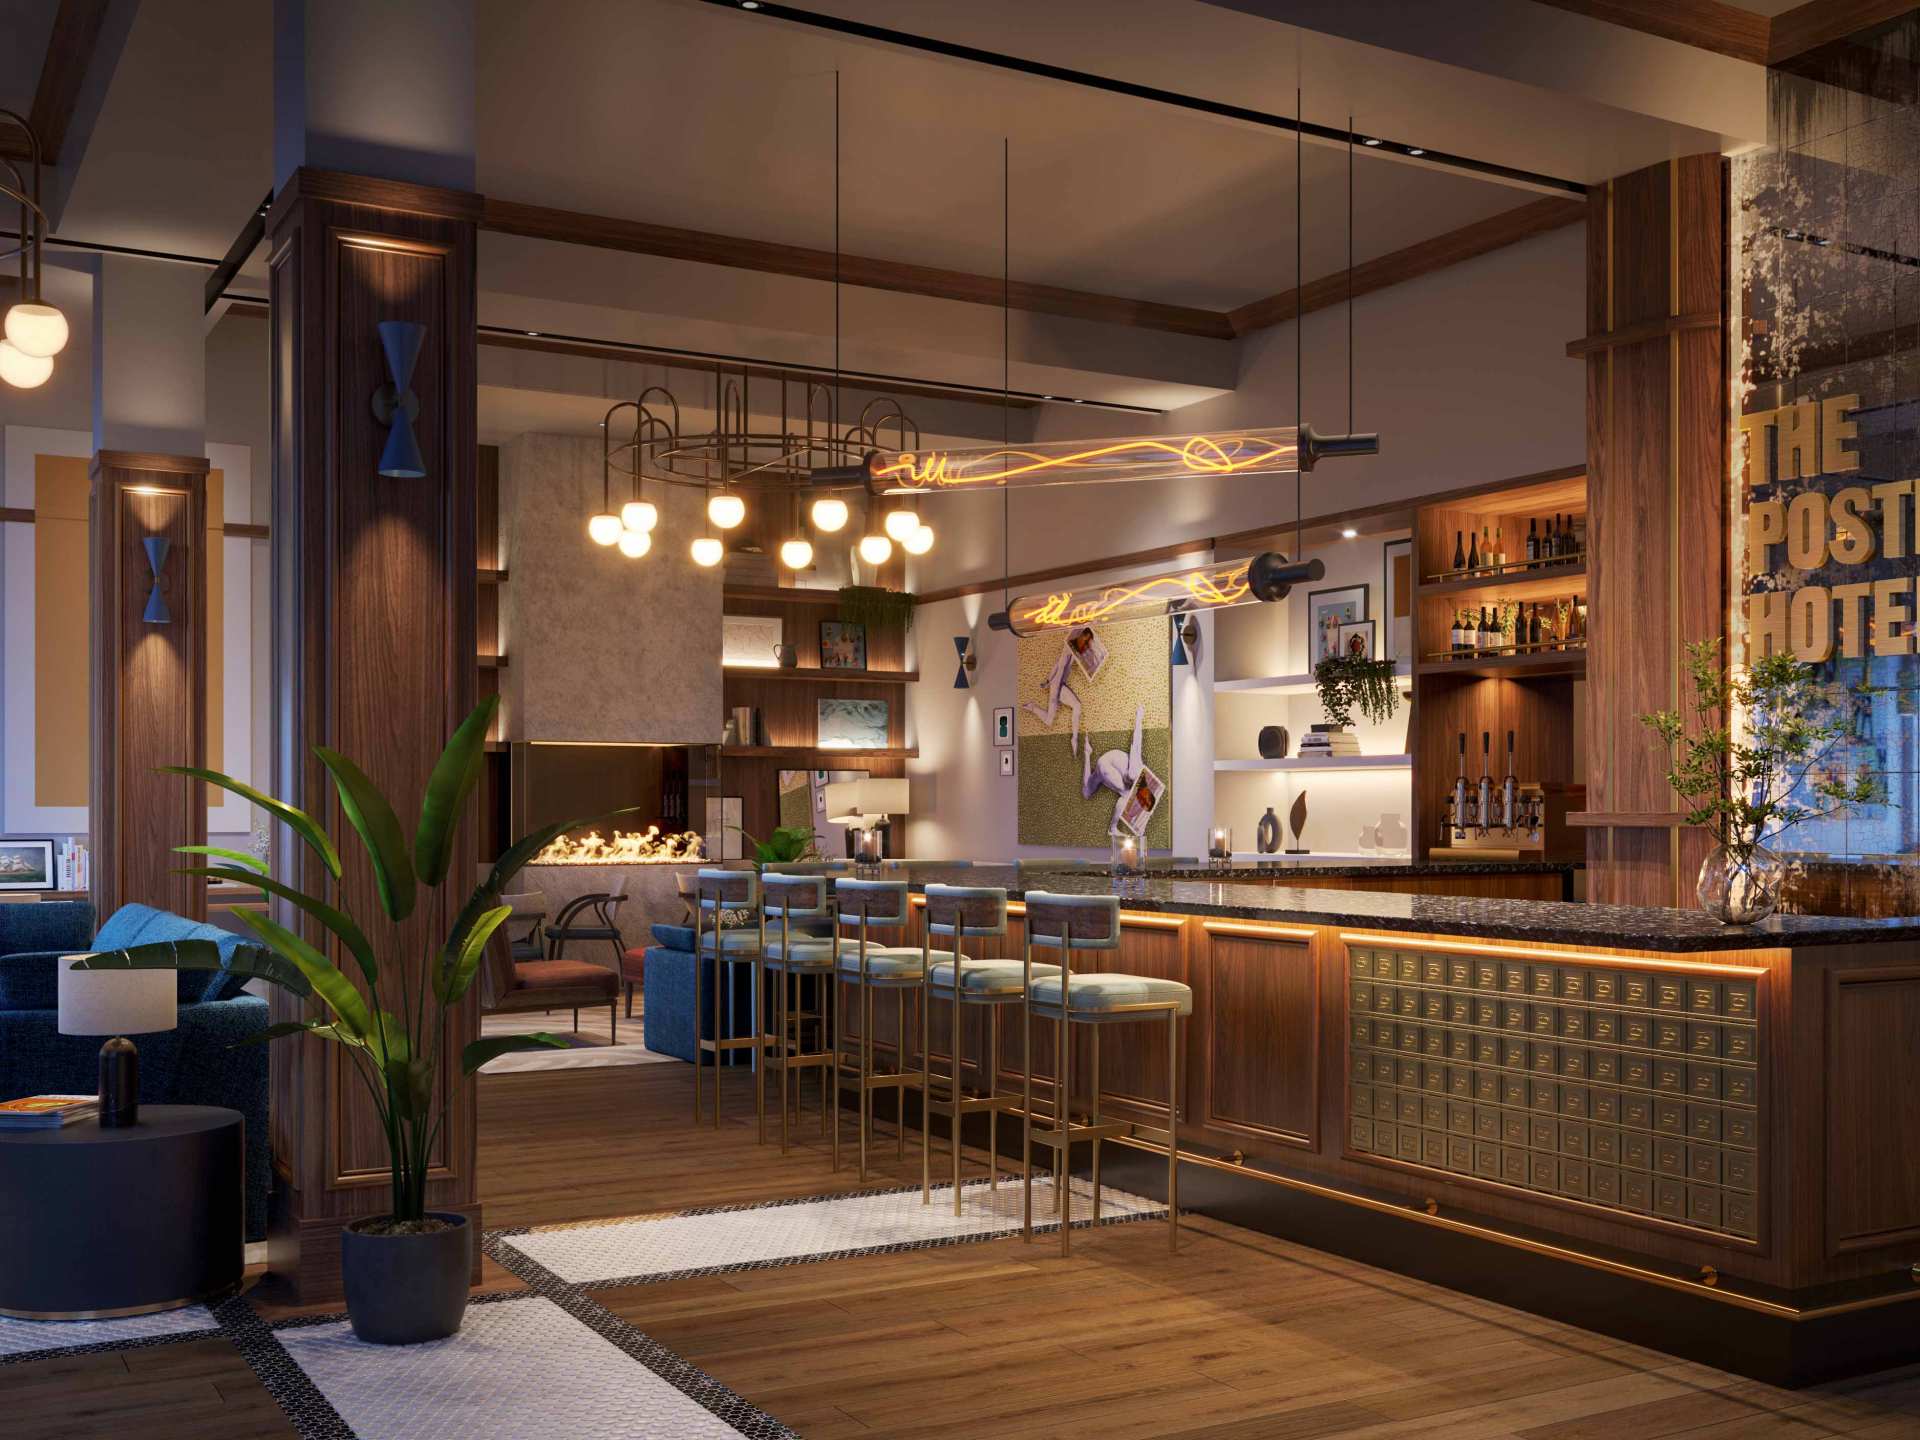 New Toronto hotels | The lobby and bar at The Postmark Hotel, Newmarket